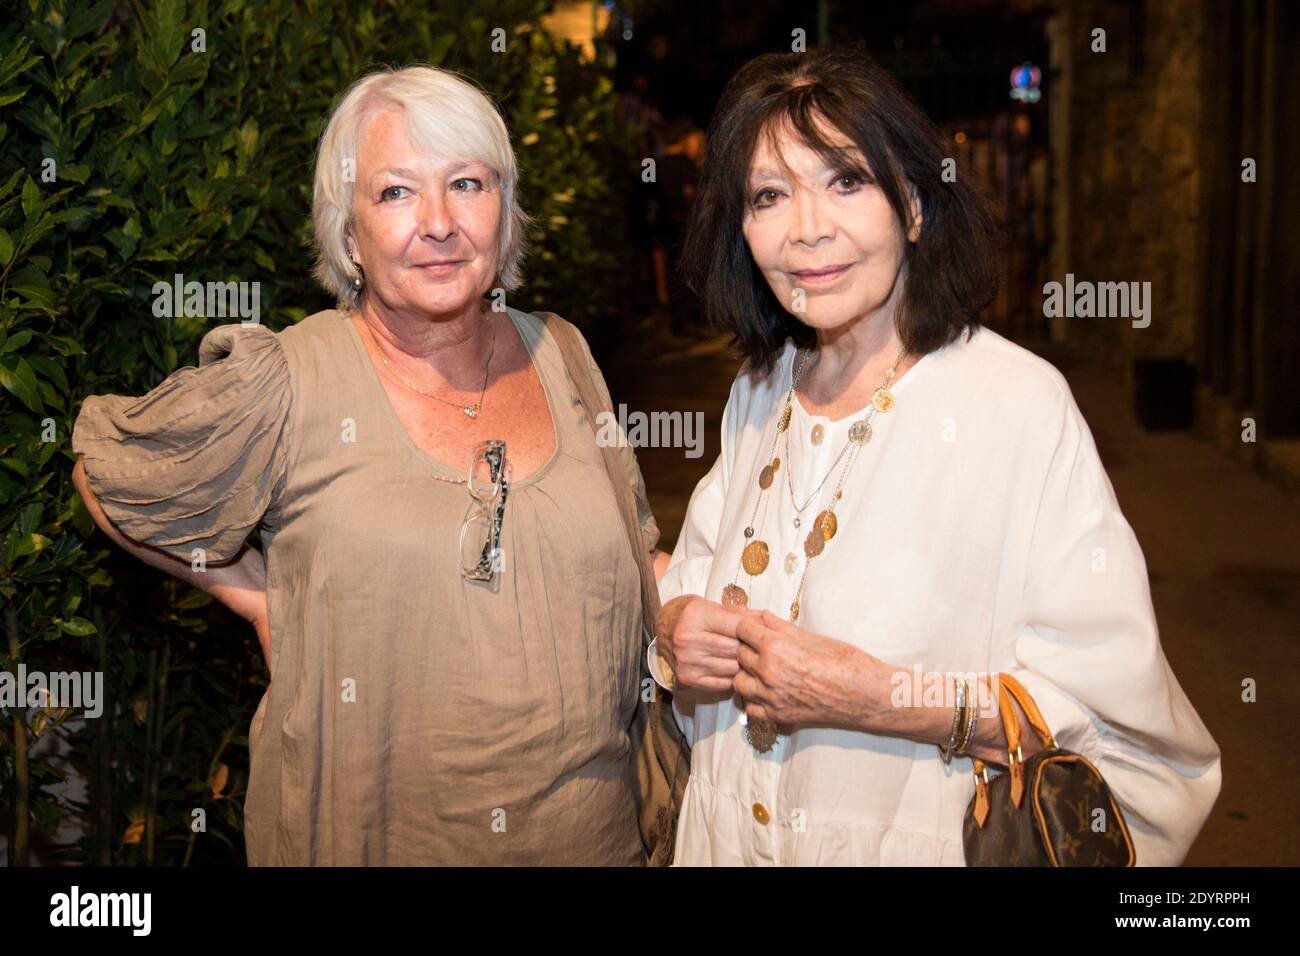 Juliette Greco and her daughter Laurence-Marie during the 29th Festival de Ramatuelle theater festival, in Ramatuelle, near Saint-Tropez, southern France on August 11, 2013. Photo by Cyril Bruneau/ABACAPRESS.COM Stock Photo